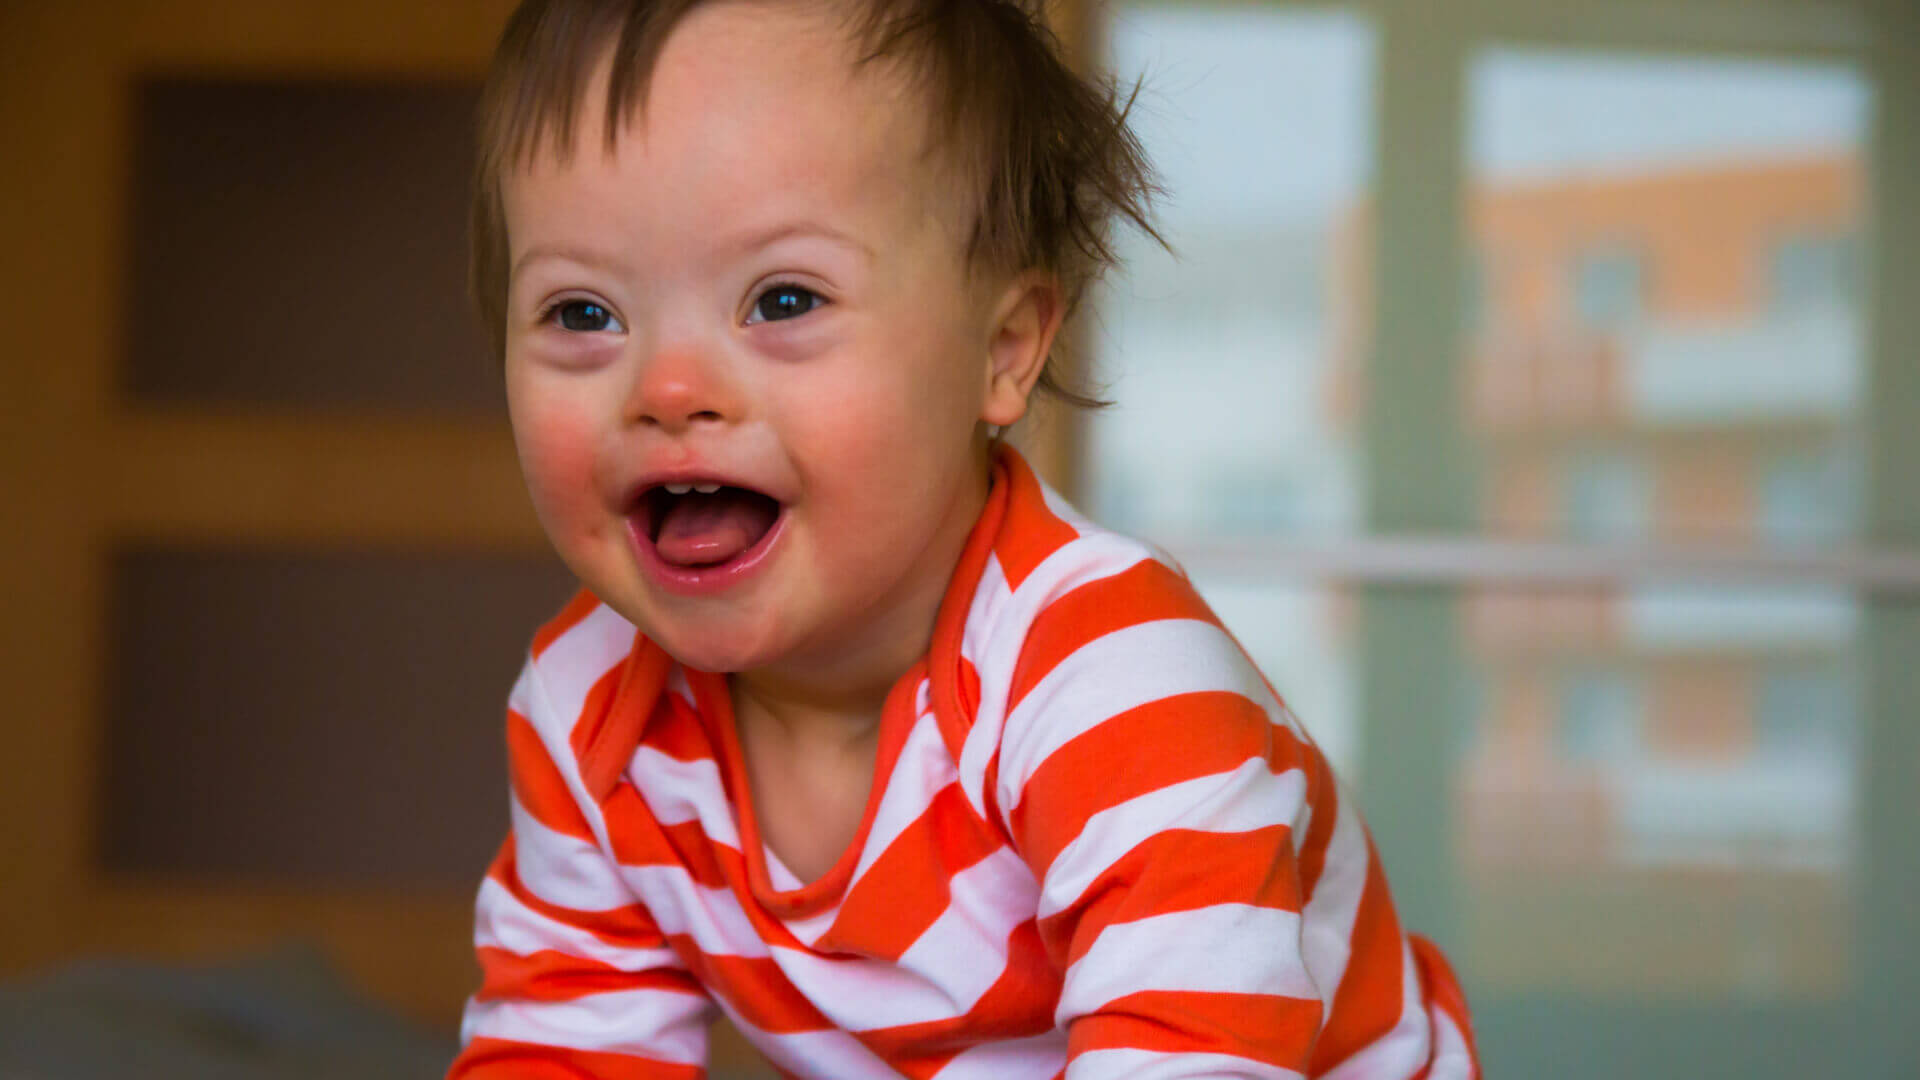 Child With Down Syndrome 1 